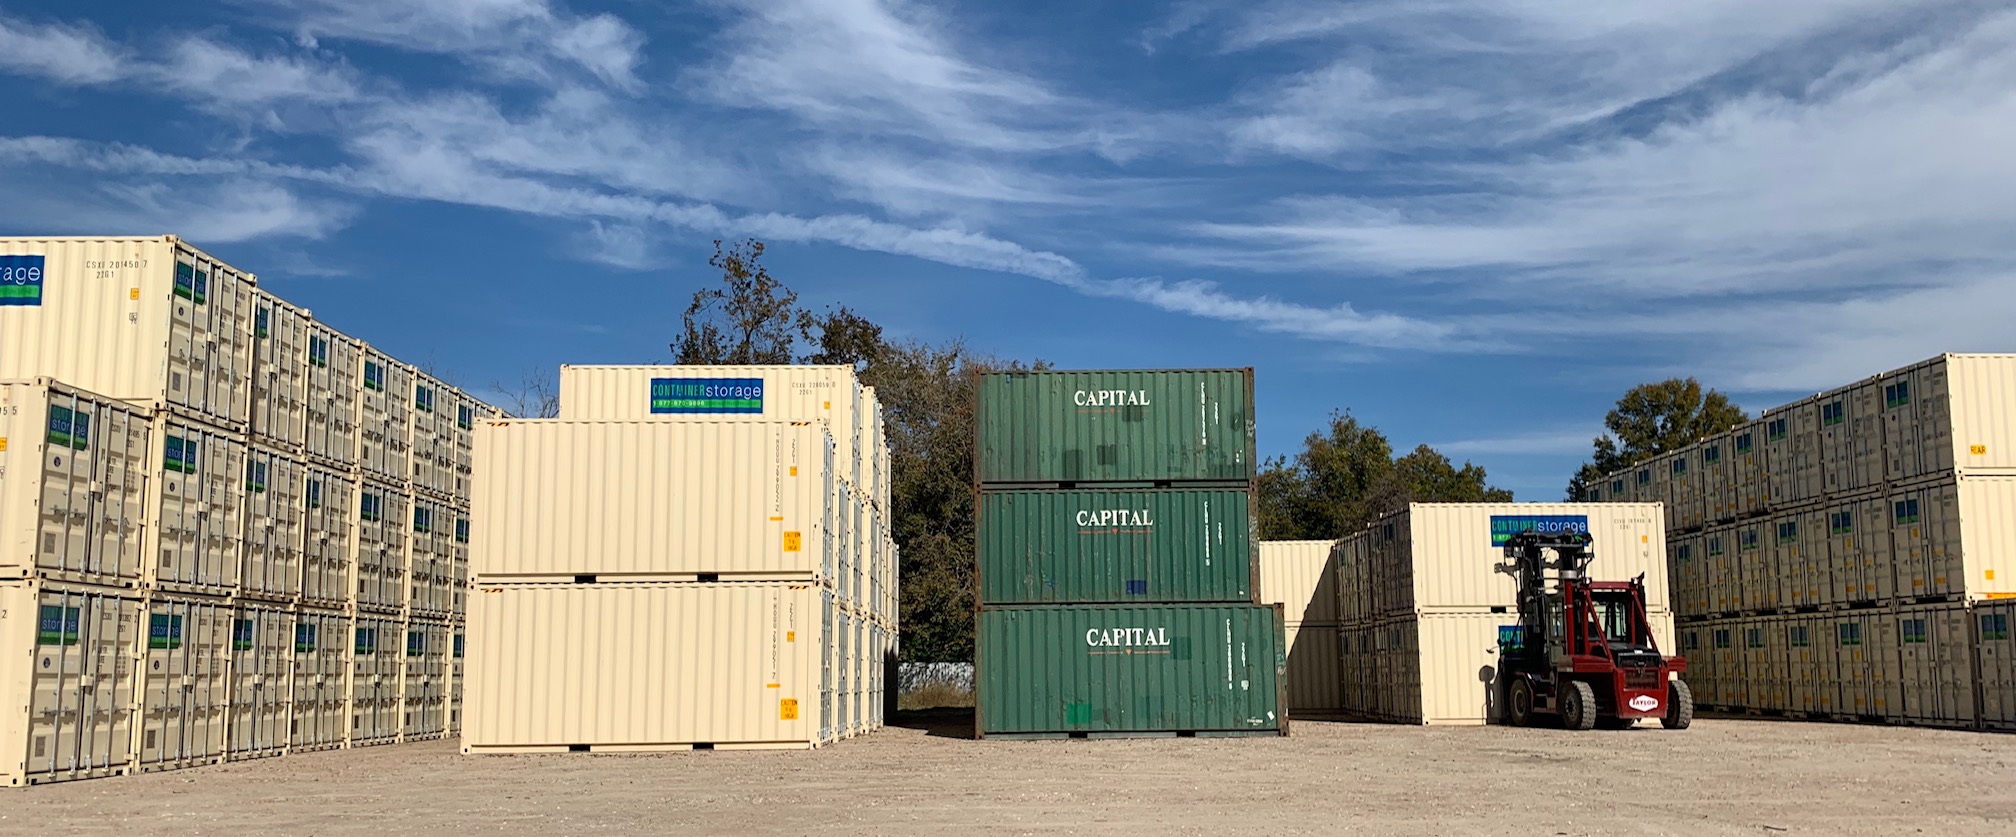 rent-or-buy-storage-containers-houston-texas.jpg